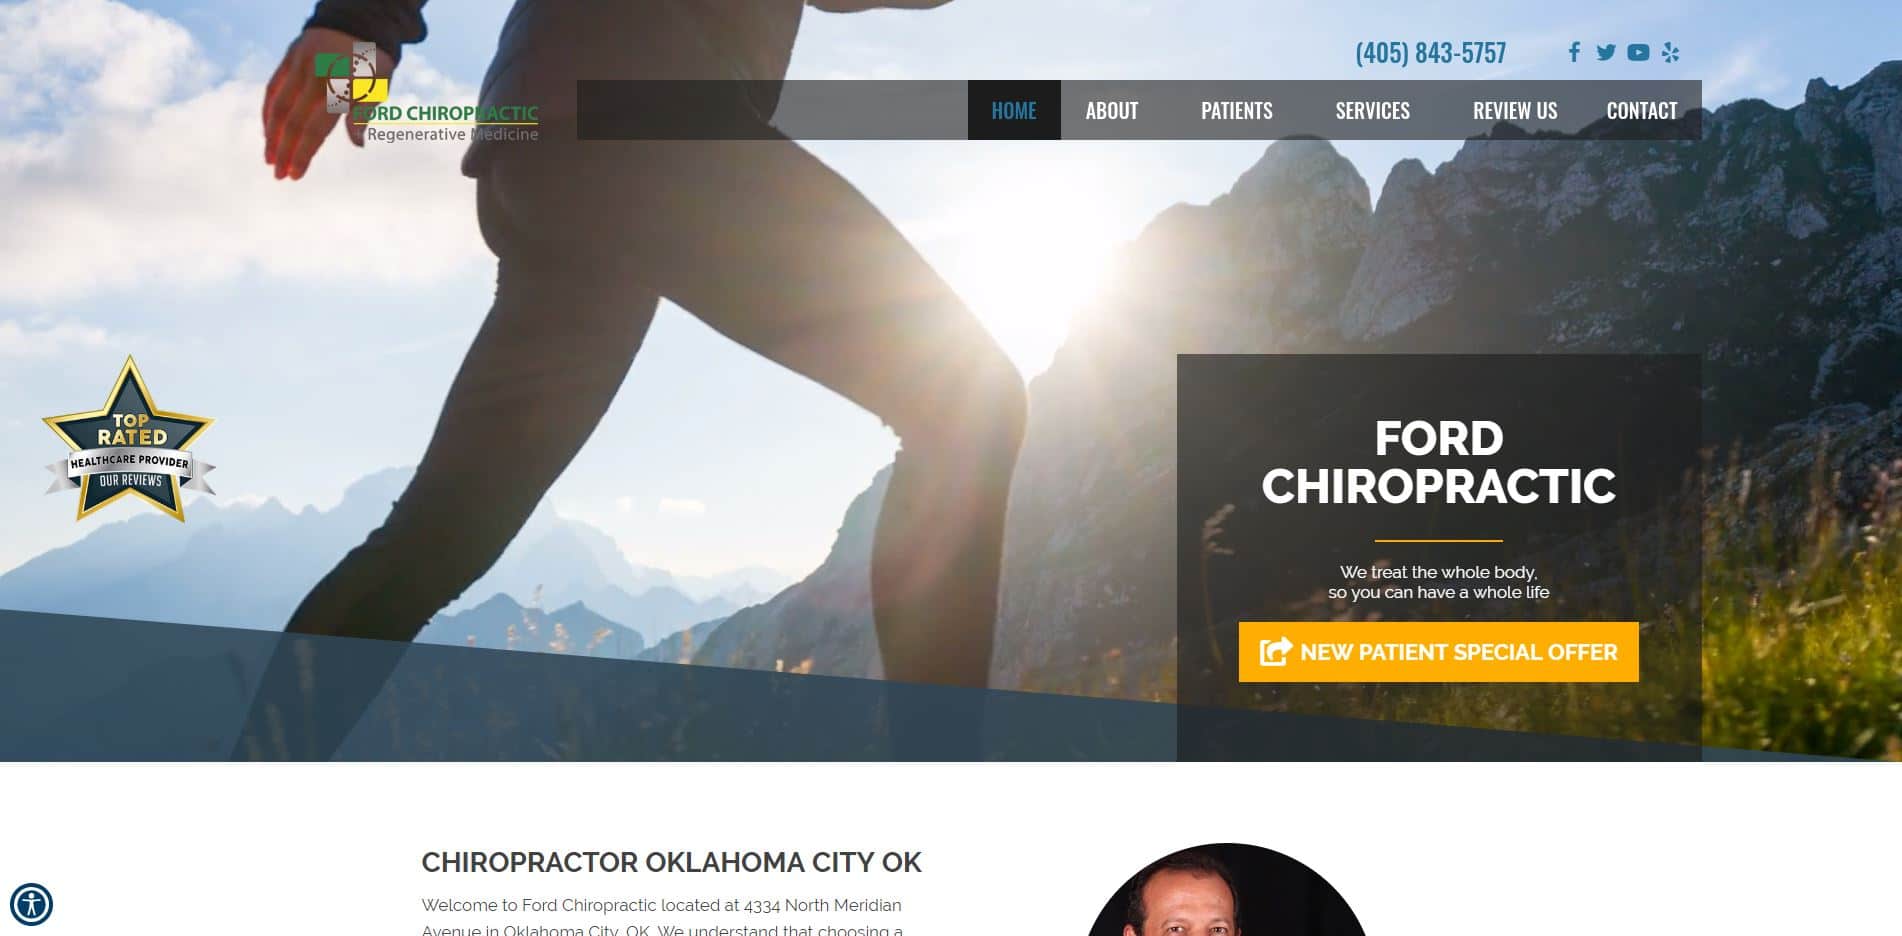 Chiropractor in Oklahoma City